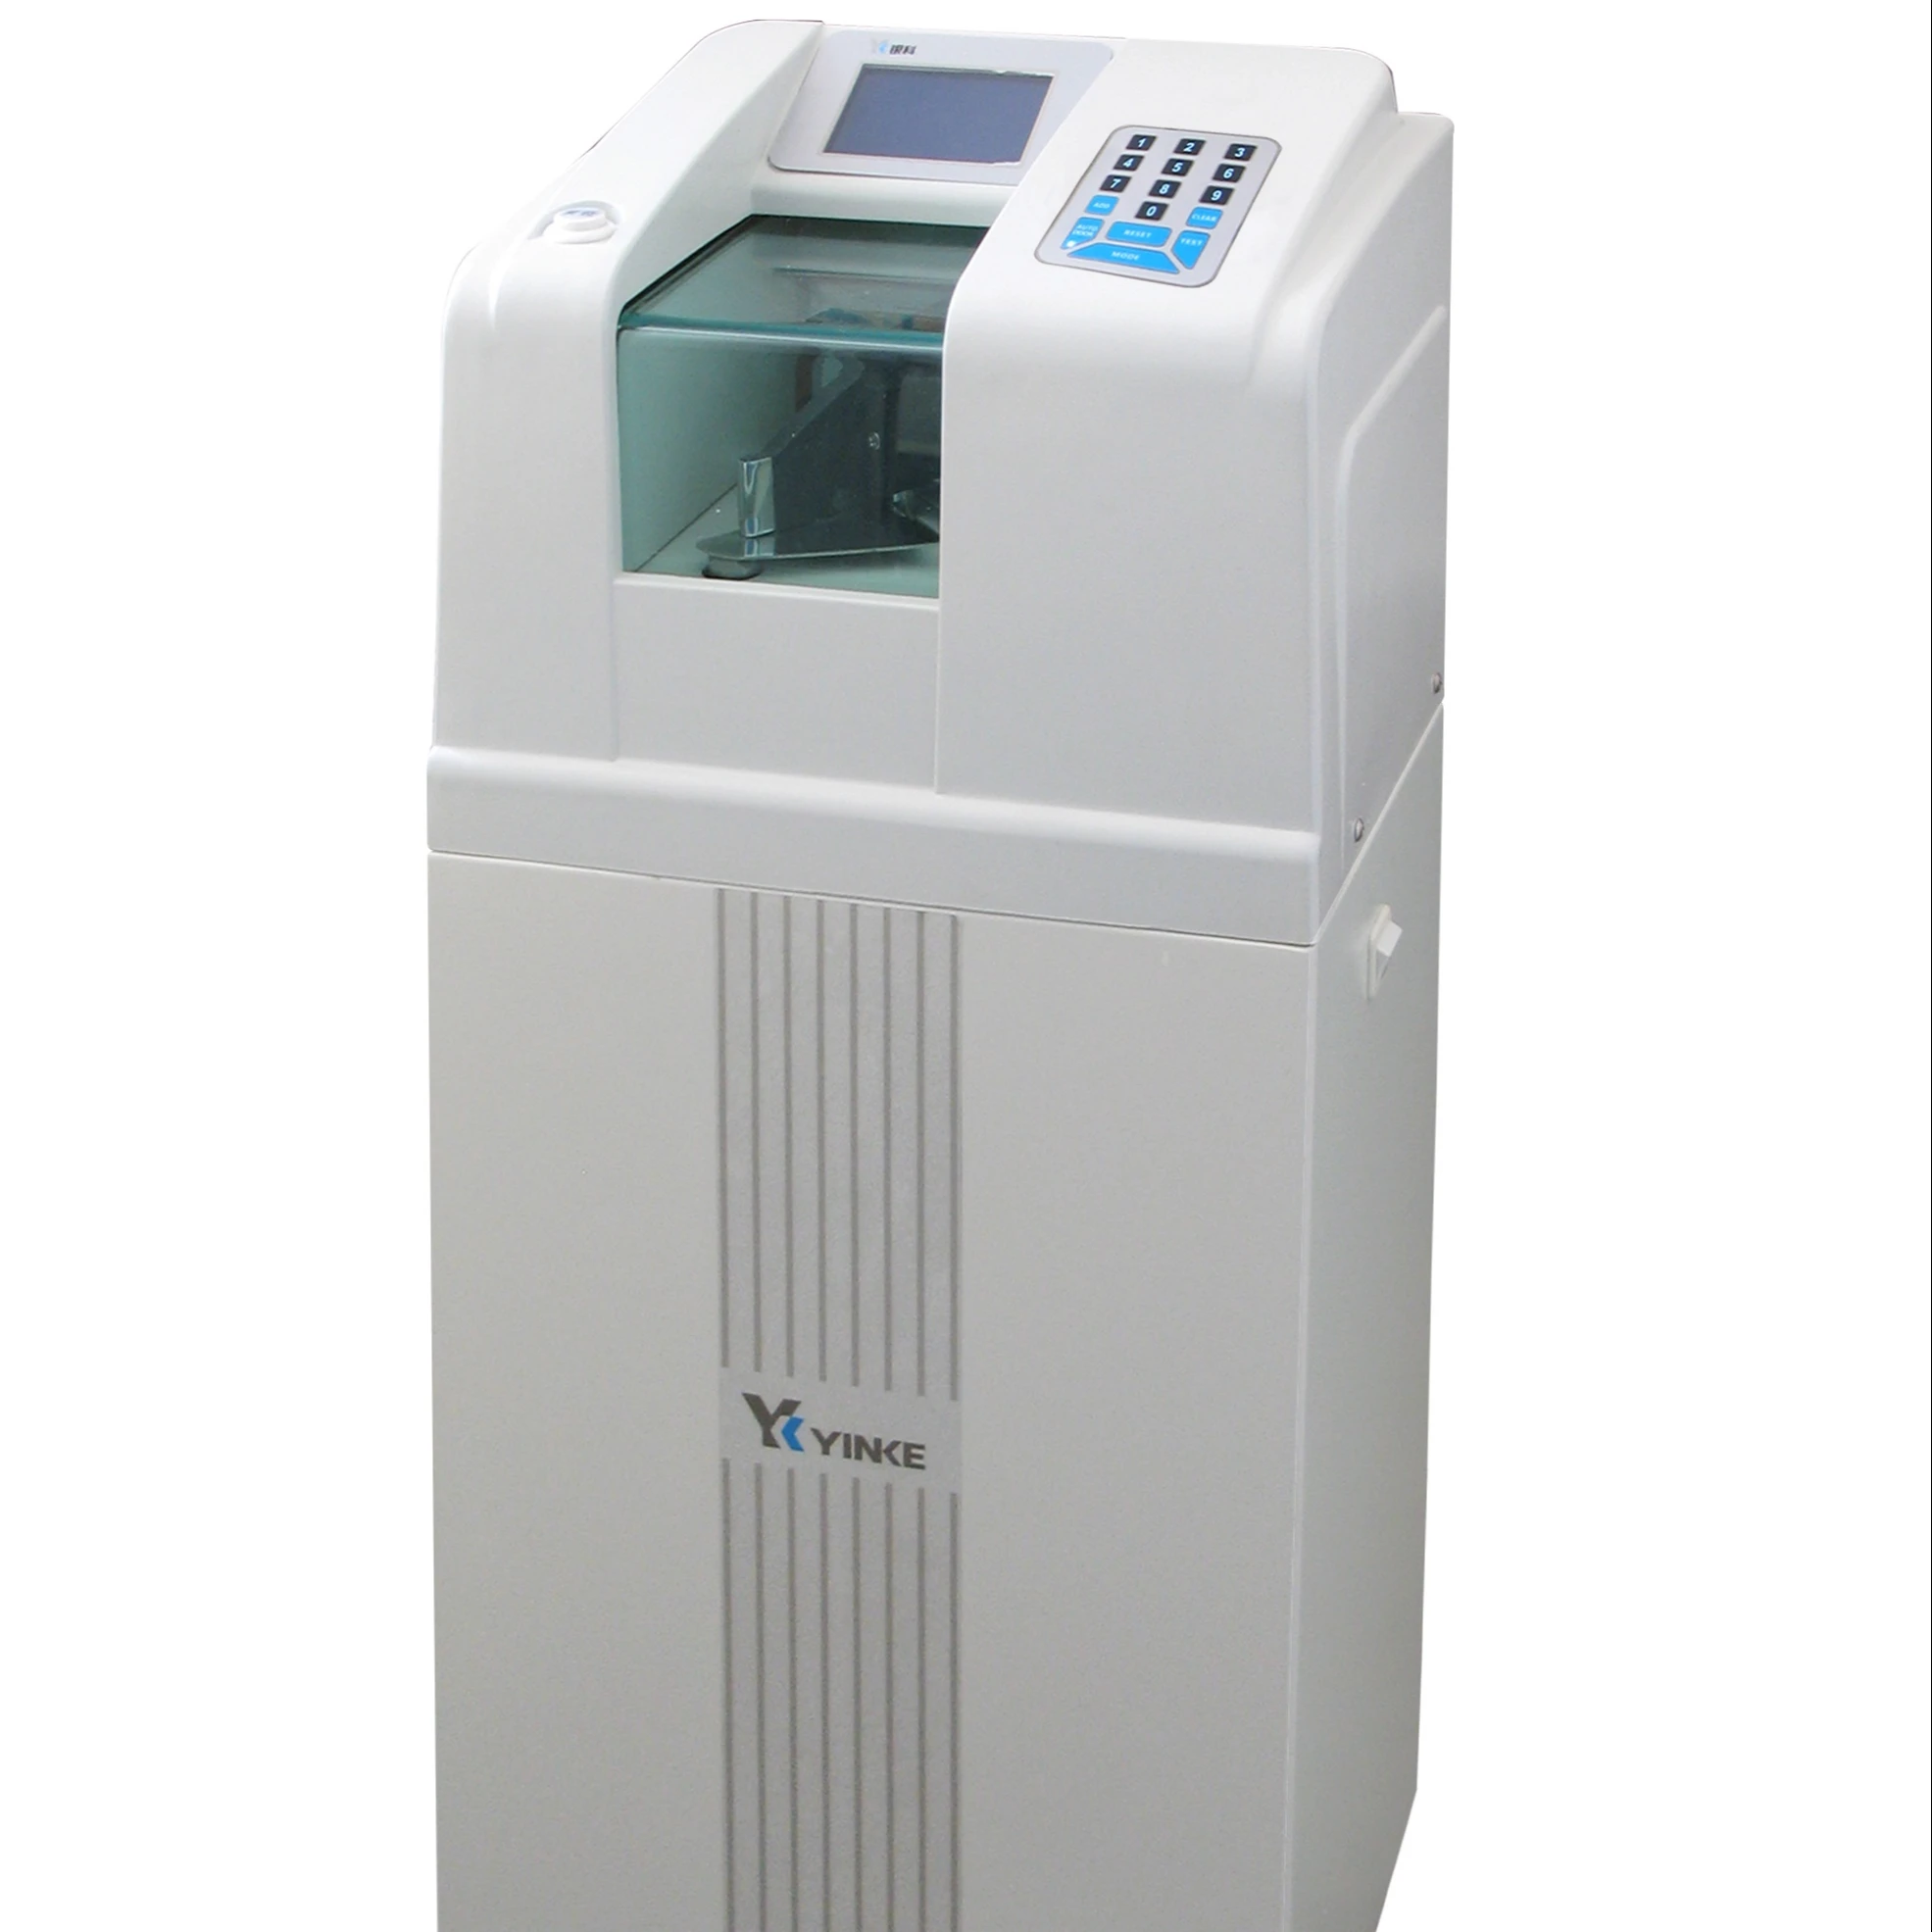 
High quality LCD money counting machine vacuum banknote counter 